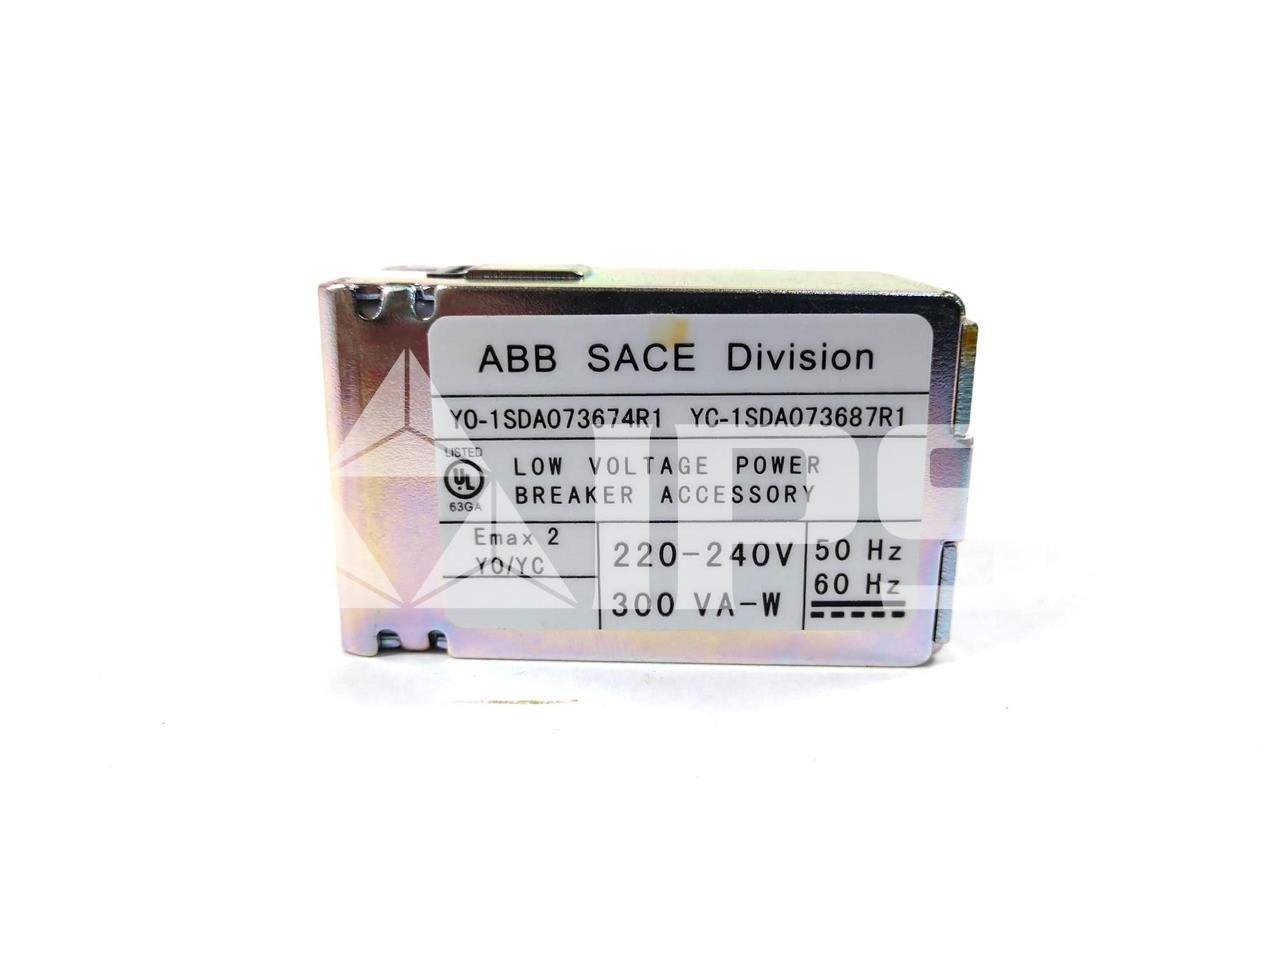 ABB Sace 240vac/dc Shunt Trip Coil Assembly For Emax 2